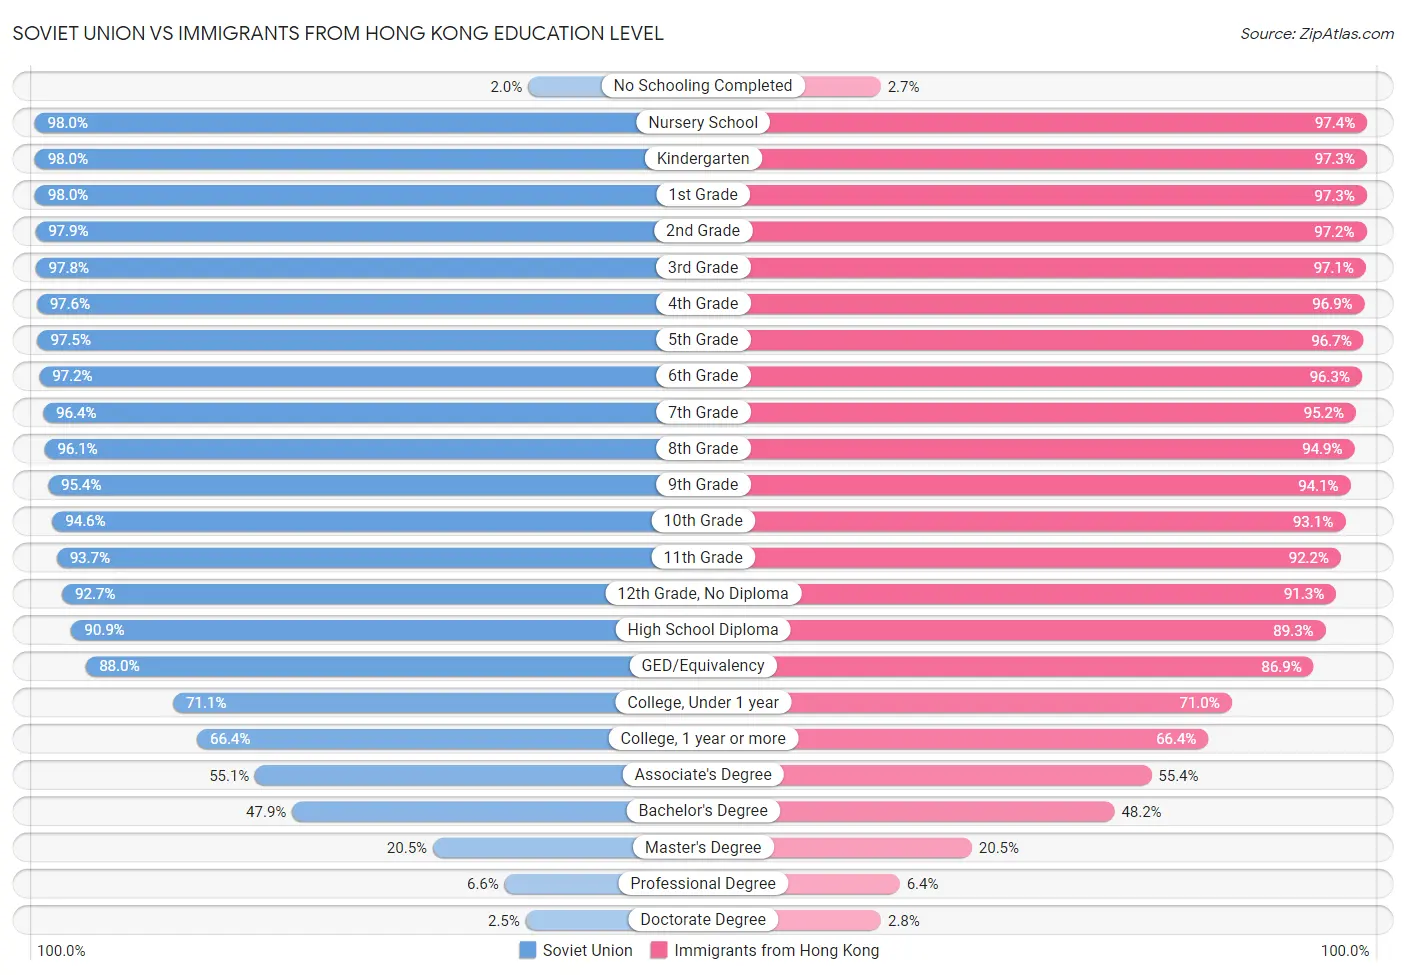 Soviet Union vs Immigrants from Hong Kong Education Level